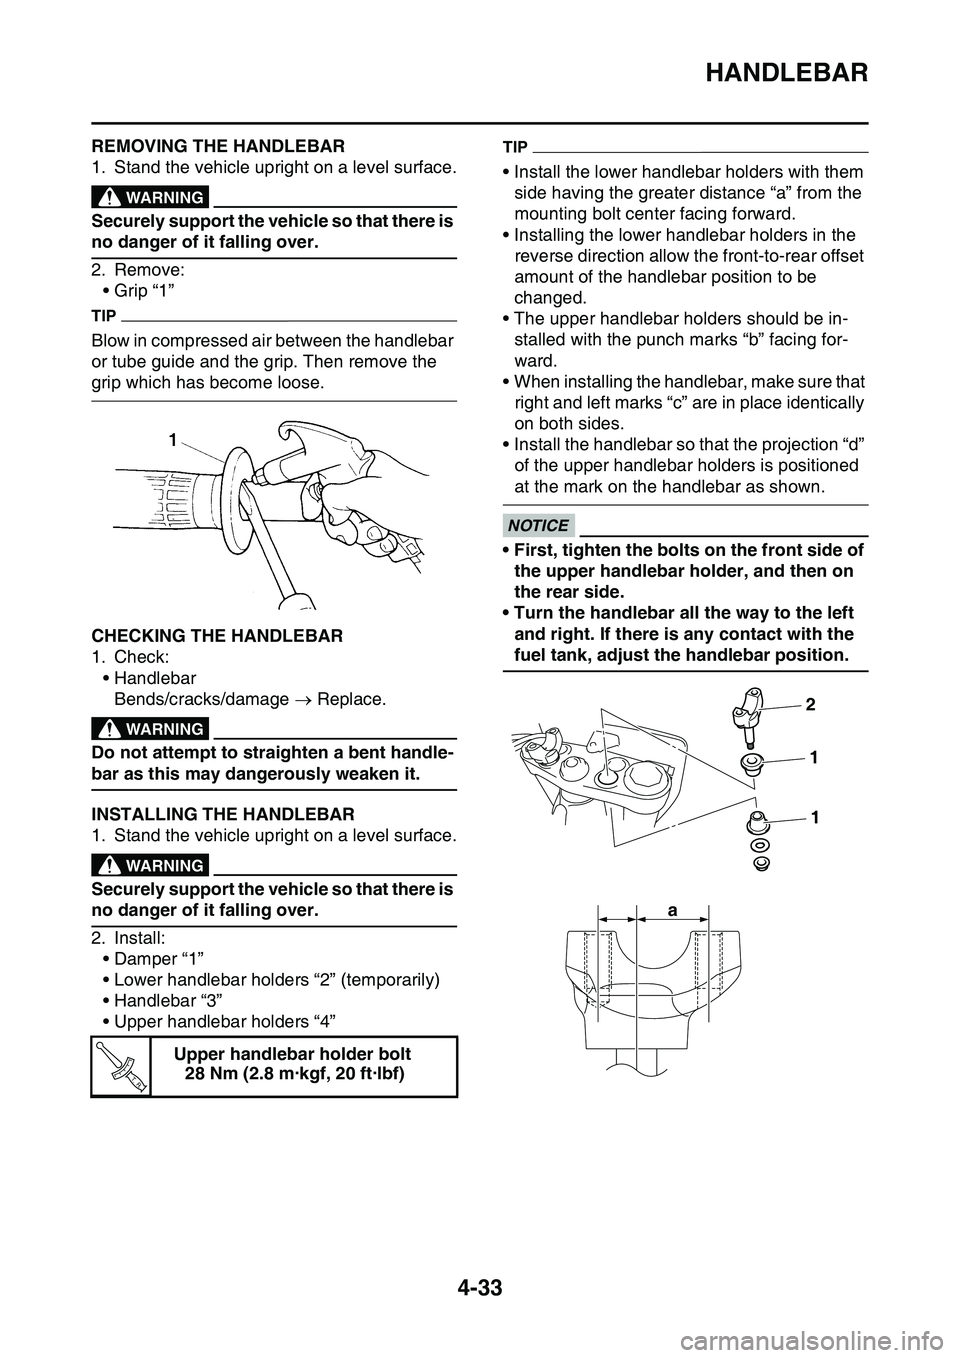 YAMAHA YZ450F 2014 Owners Guide HANDLEBAR
4-33
EAS1SL1162REMOVING THE HANDLEBAR
1. Stand the vehicle upright on a level surface.EWA13120
WARNING
Securely support the vehicle so that there is 
no danger of it falling over.
2. Remove: